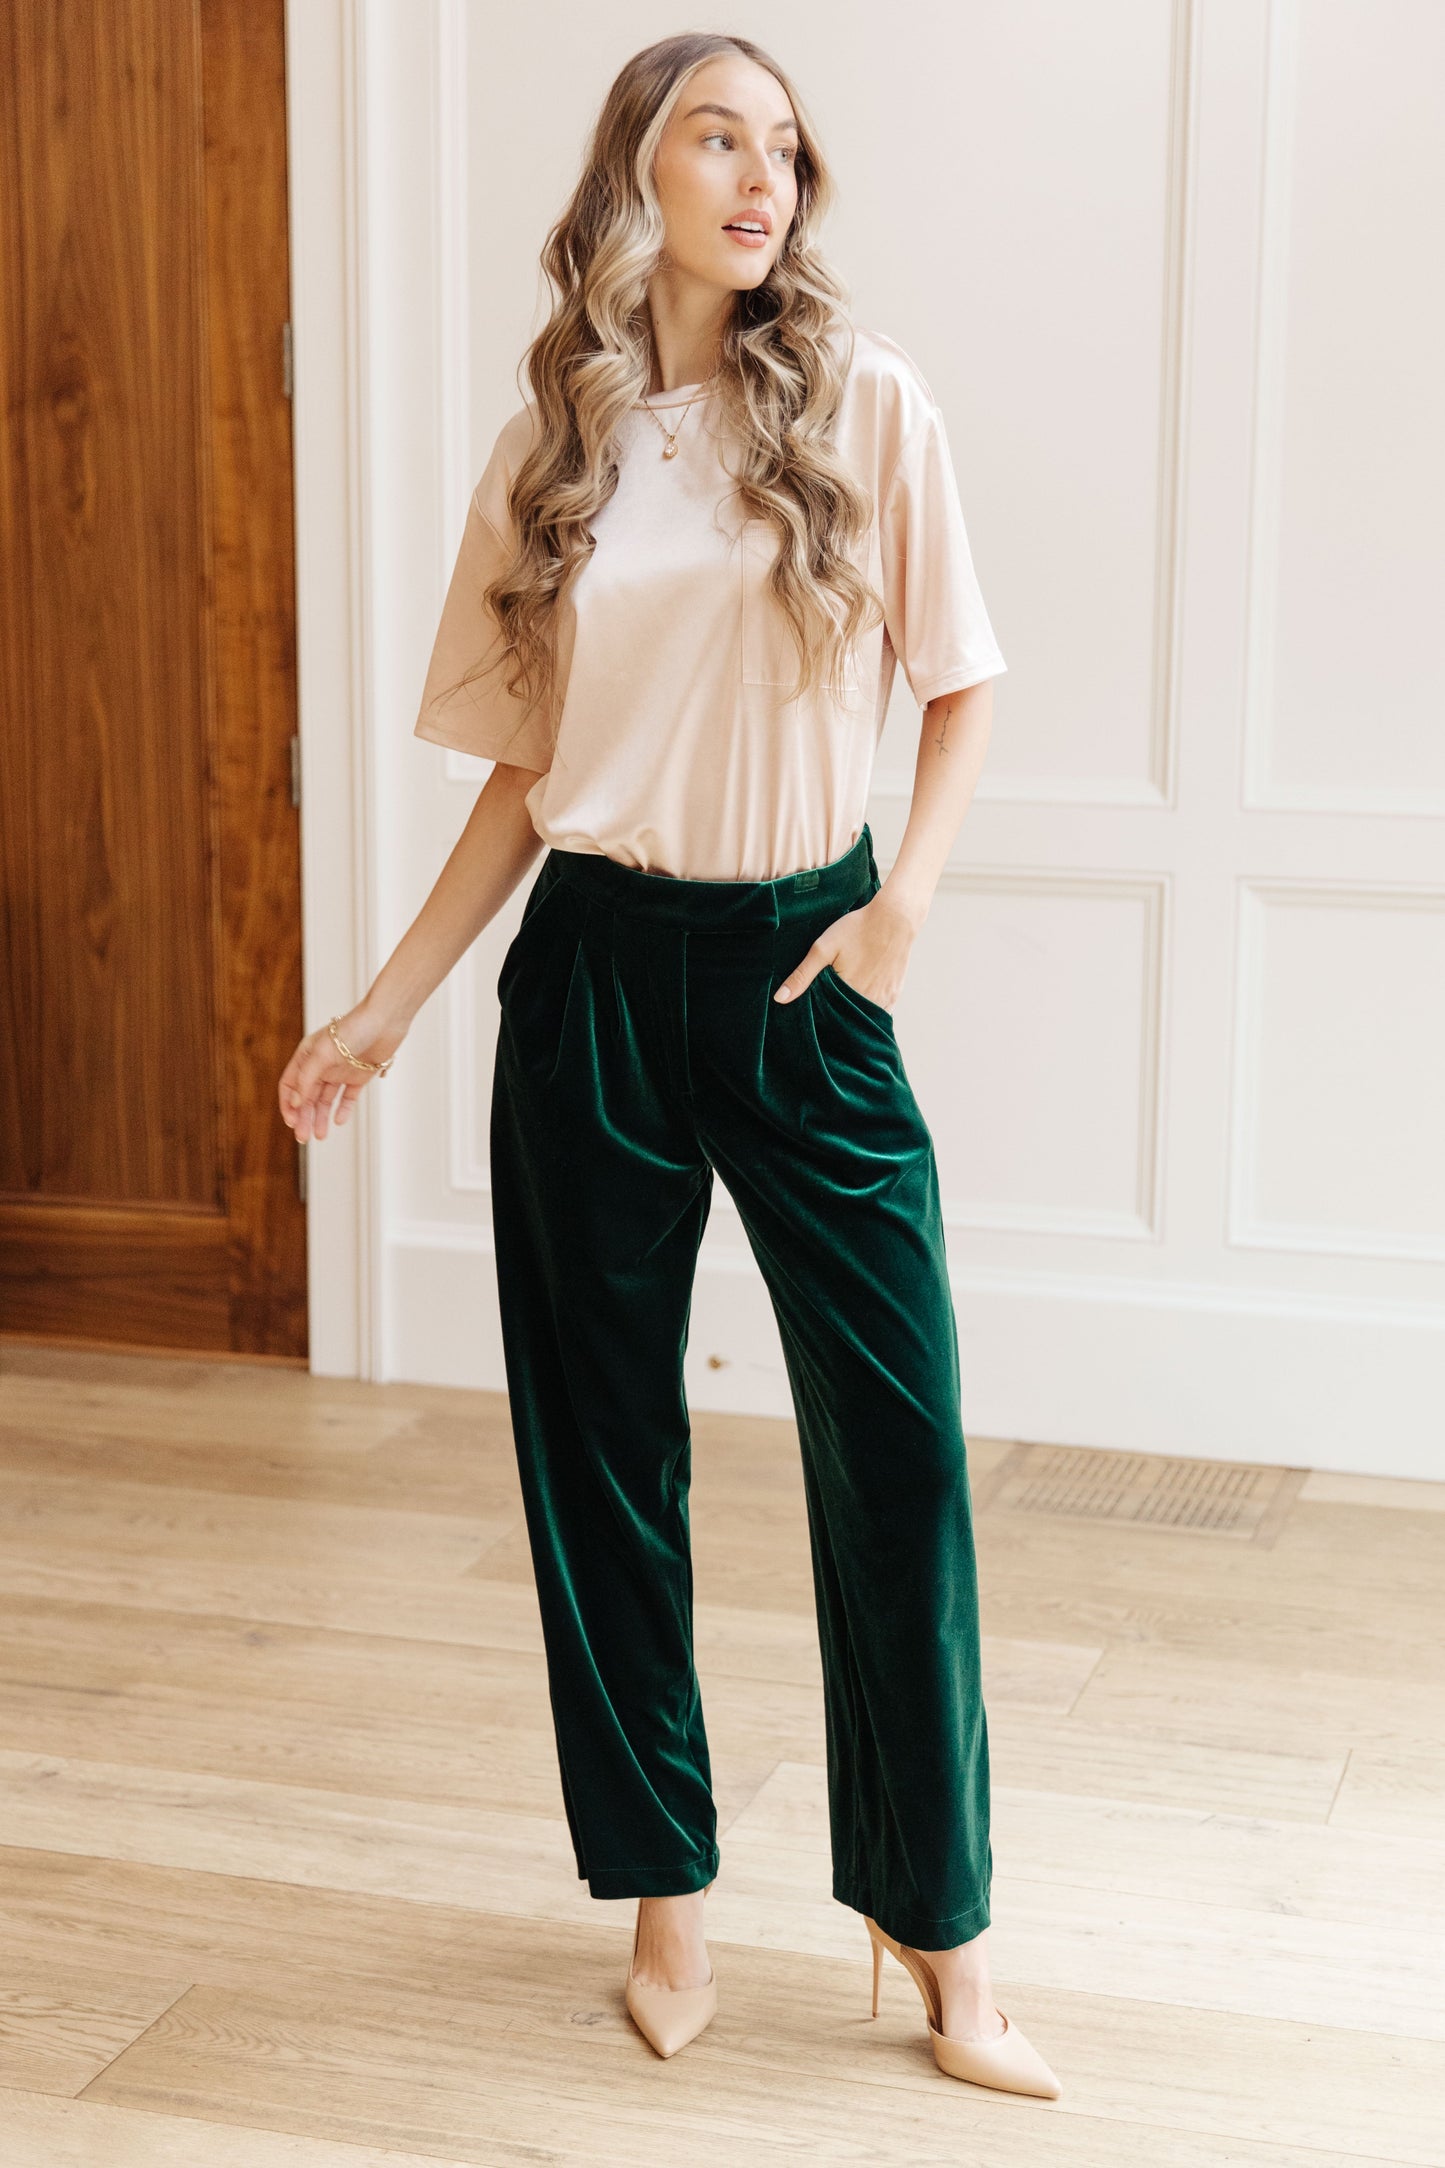 Achieve effortless elegance with the Champagne Problems Satin Top. Its silky fabric will make you feel luxuriously comfortable, while its boxy fit and patch pocket give it a timelessly stylish finish. A perfect addition for any wardrobe. S - 3X